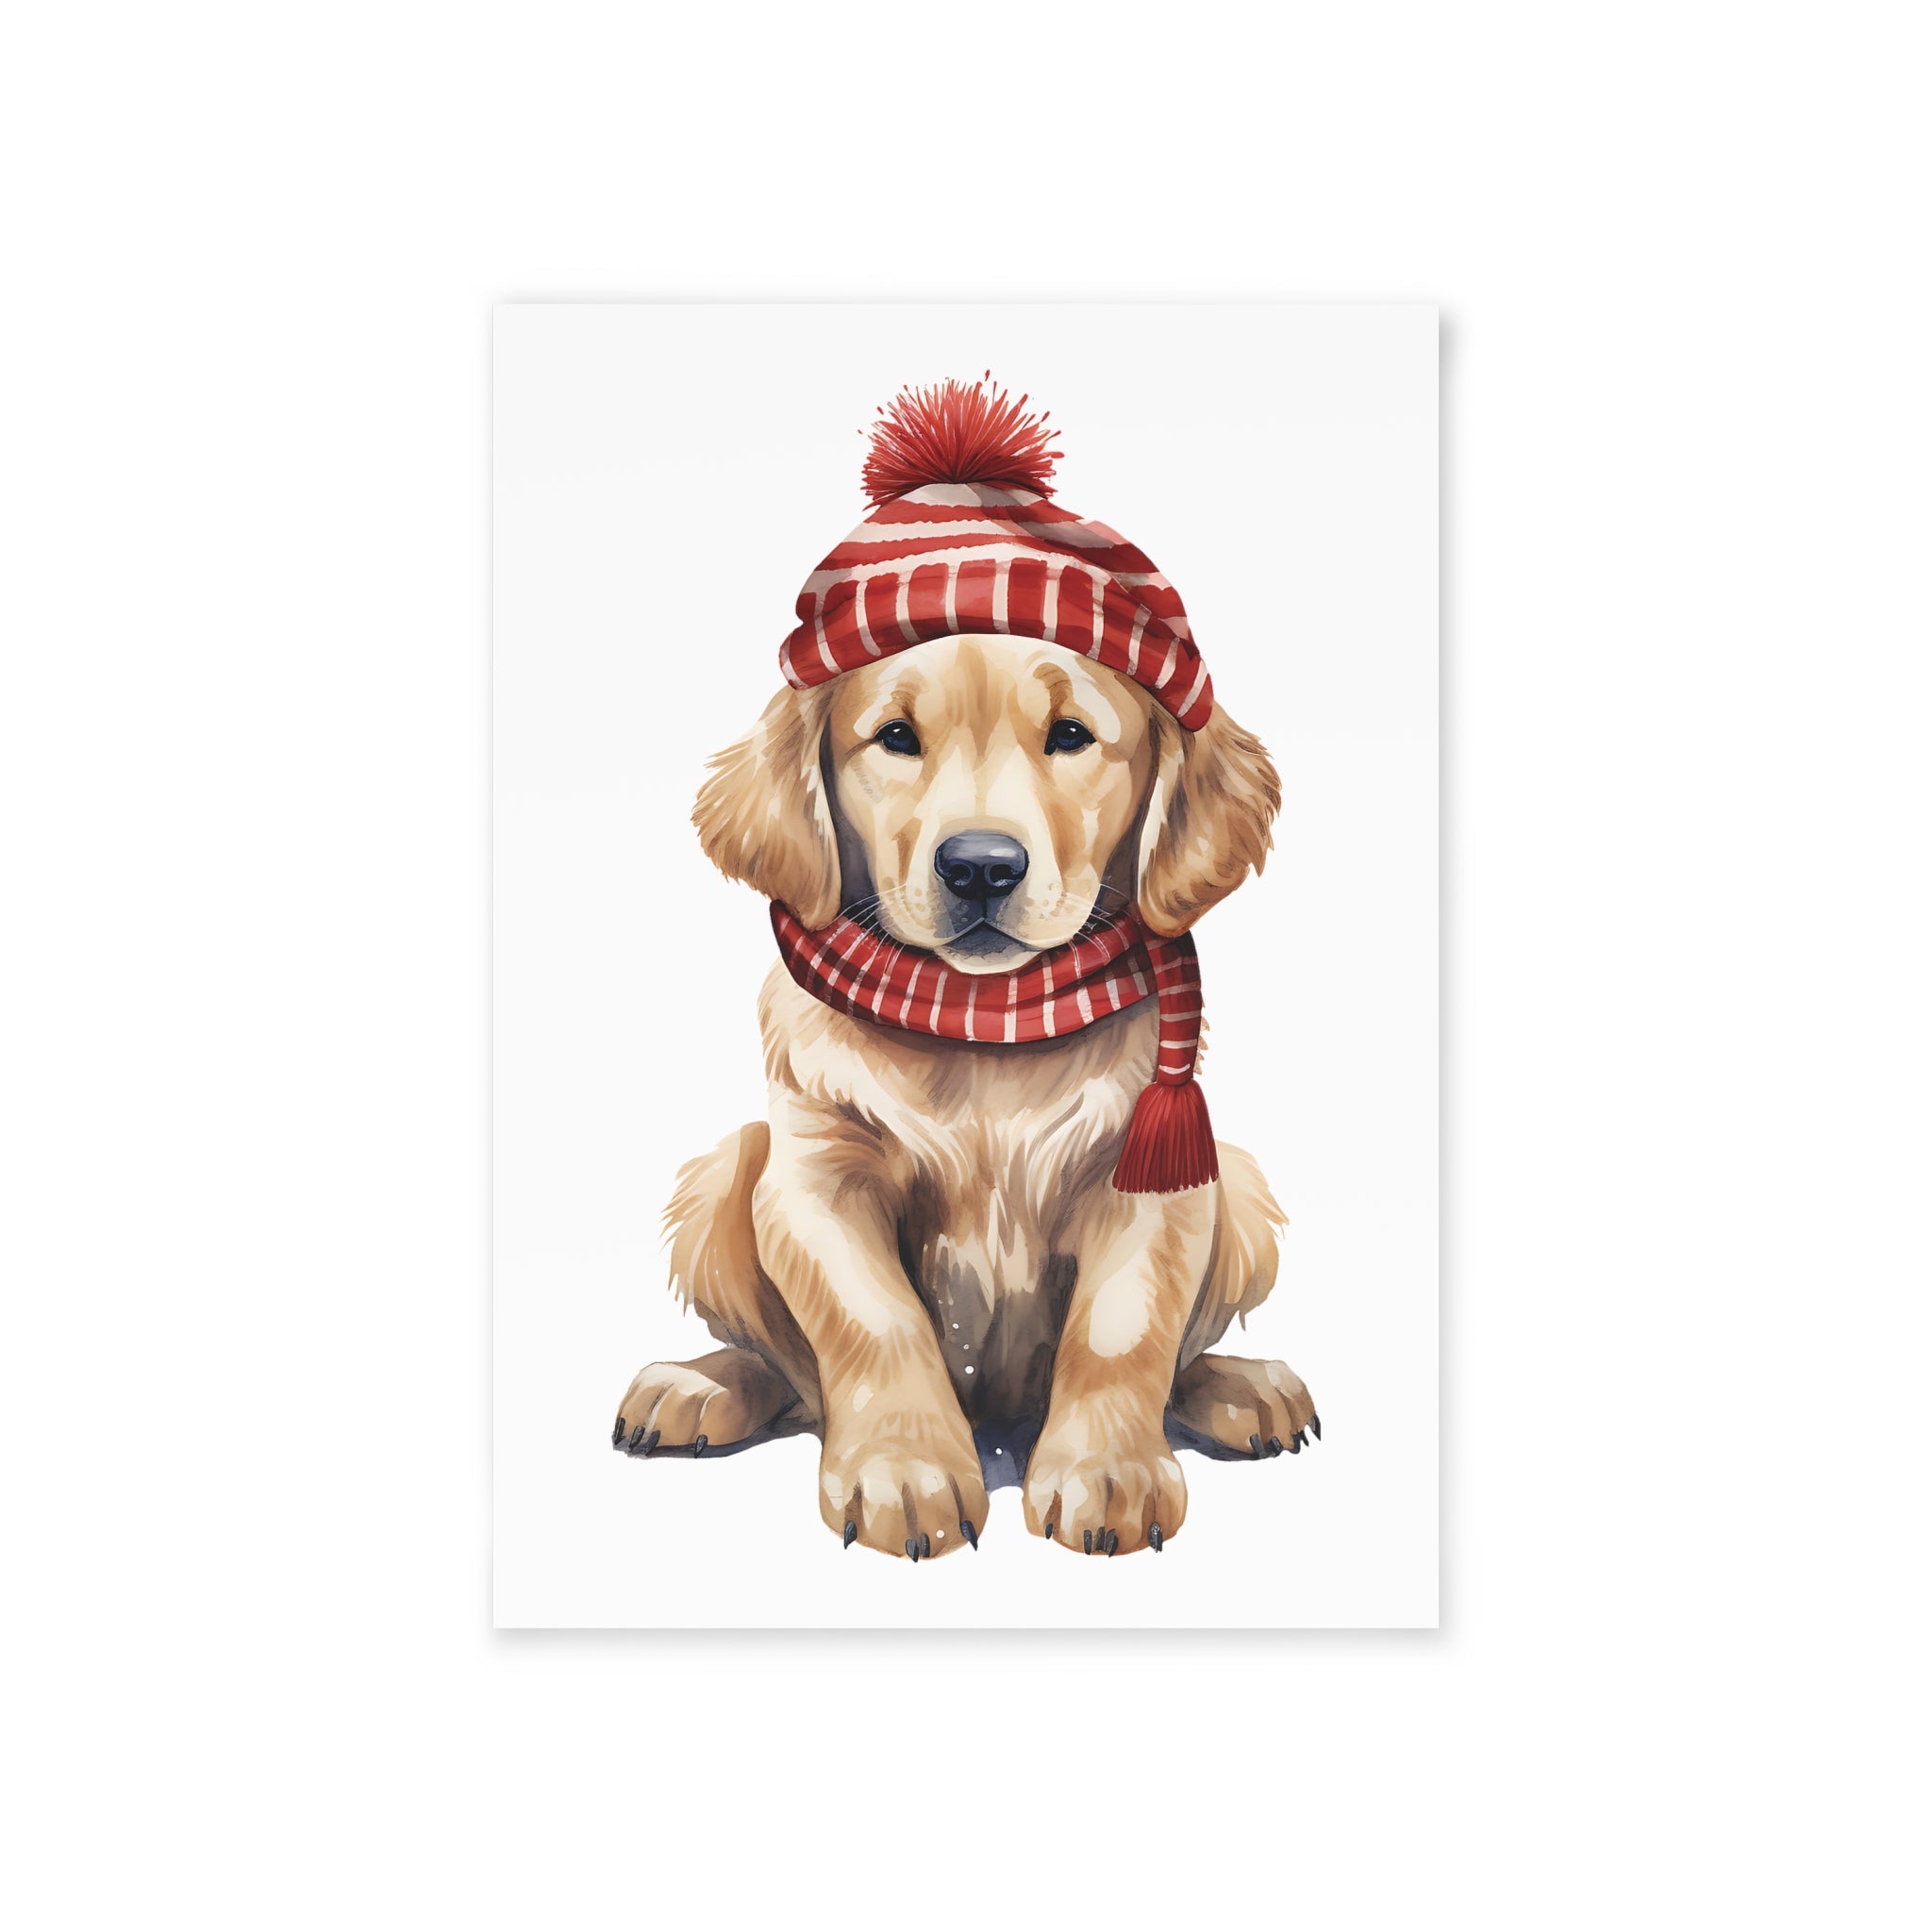 Golden Retriever, Christmas Dog - One-Sided Greeting Card/Art Print with Envelope, 300gsm FSC-Certified